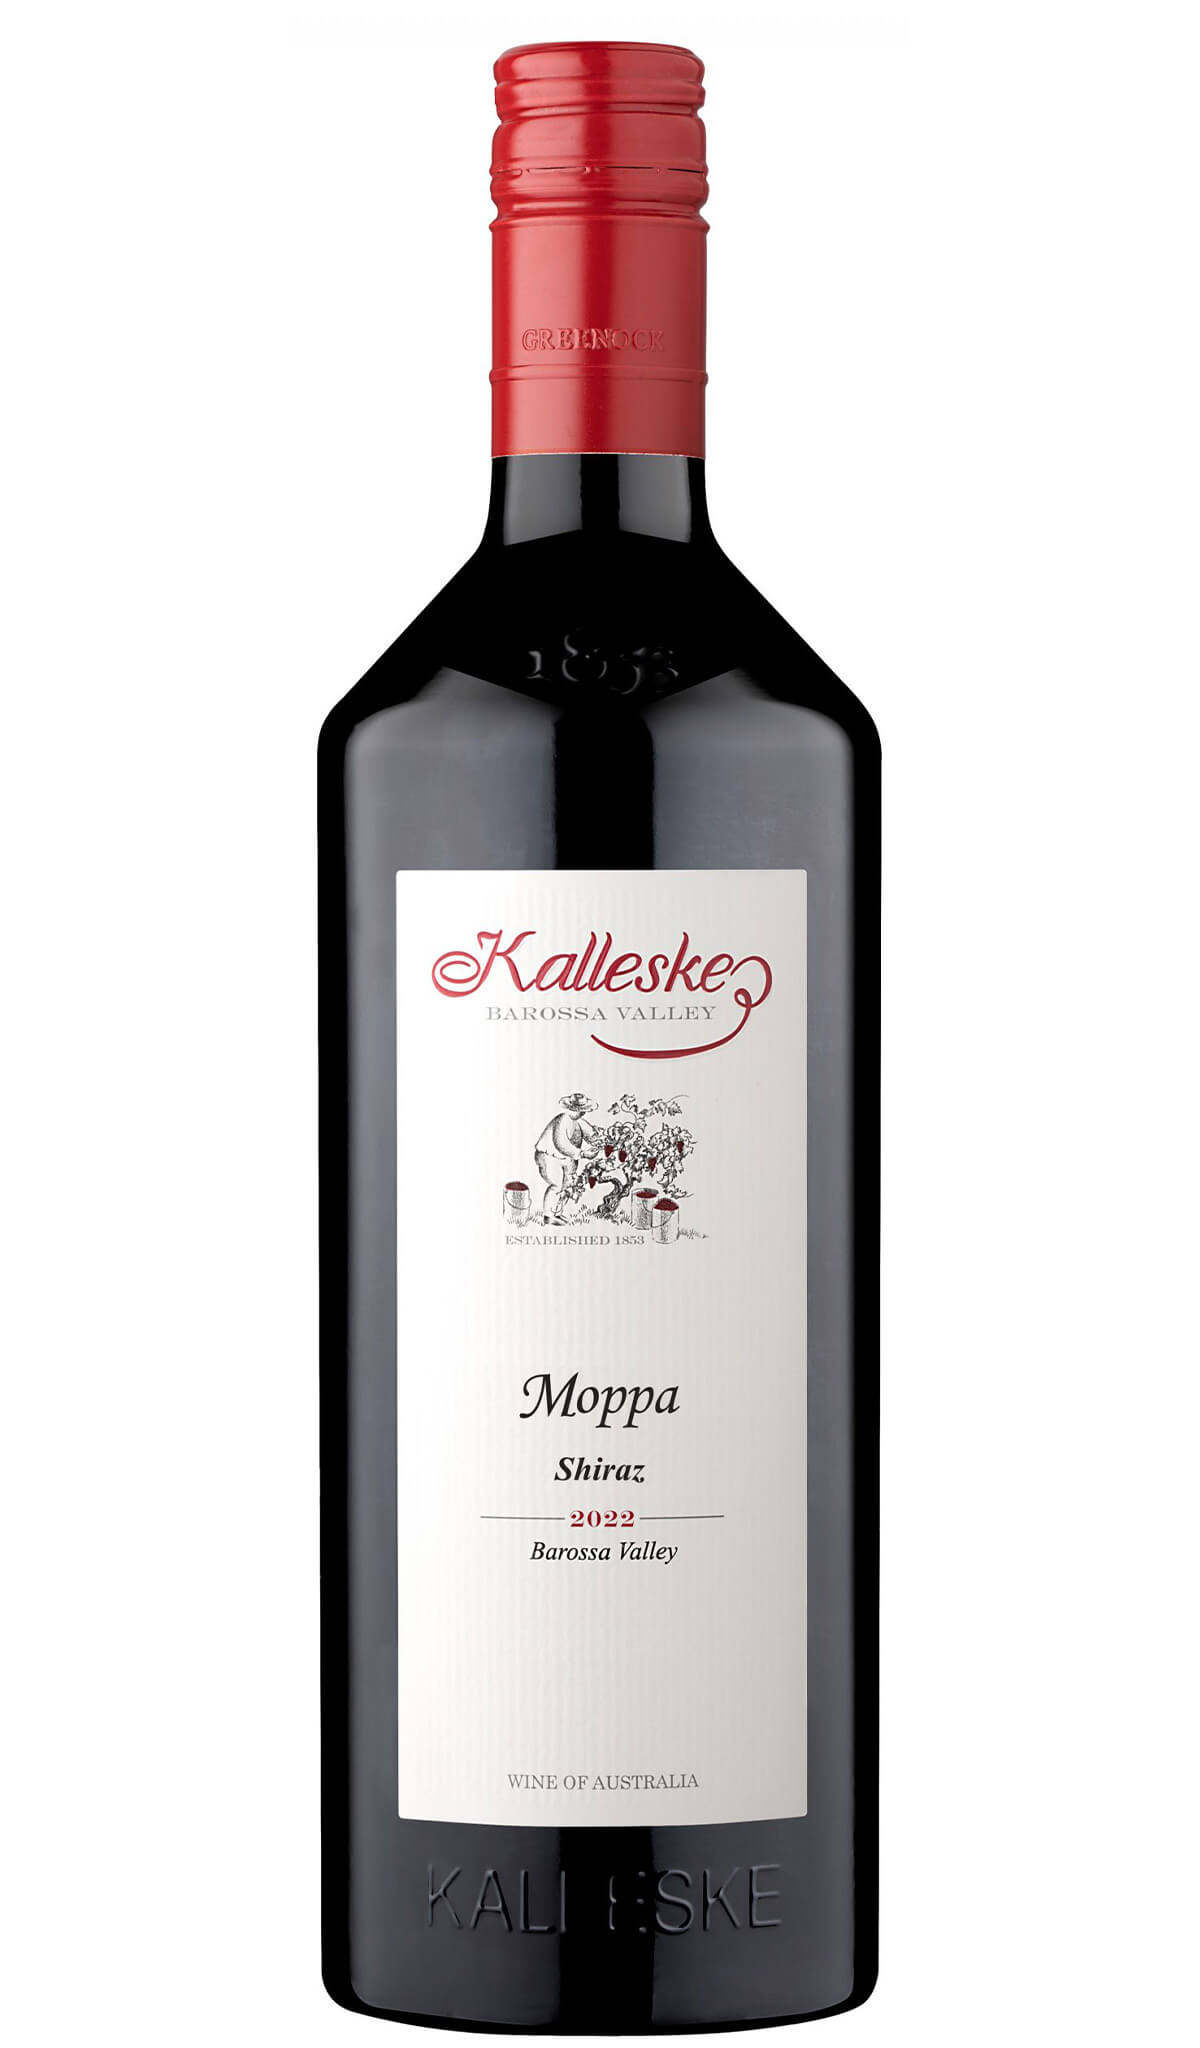 Find out more or buy Kalleske Barossa Valley Moppa Shiraz 2022 online at Wine Sellers Direct - Australia’s independent liquor specialists.